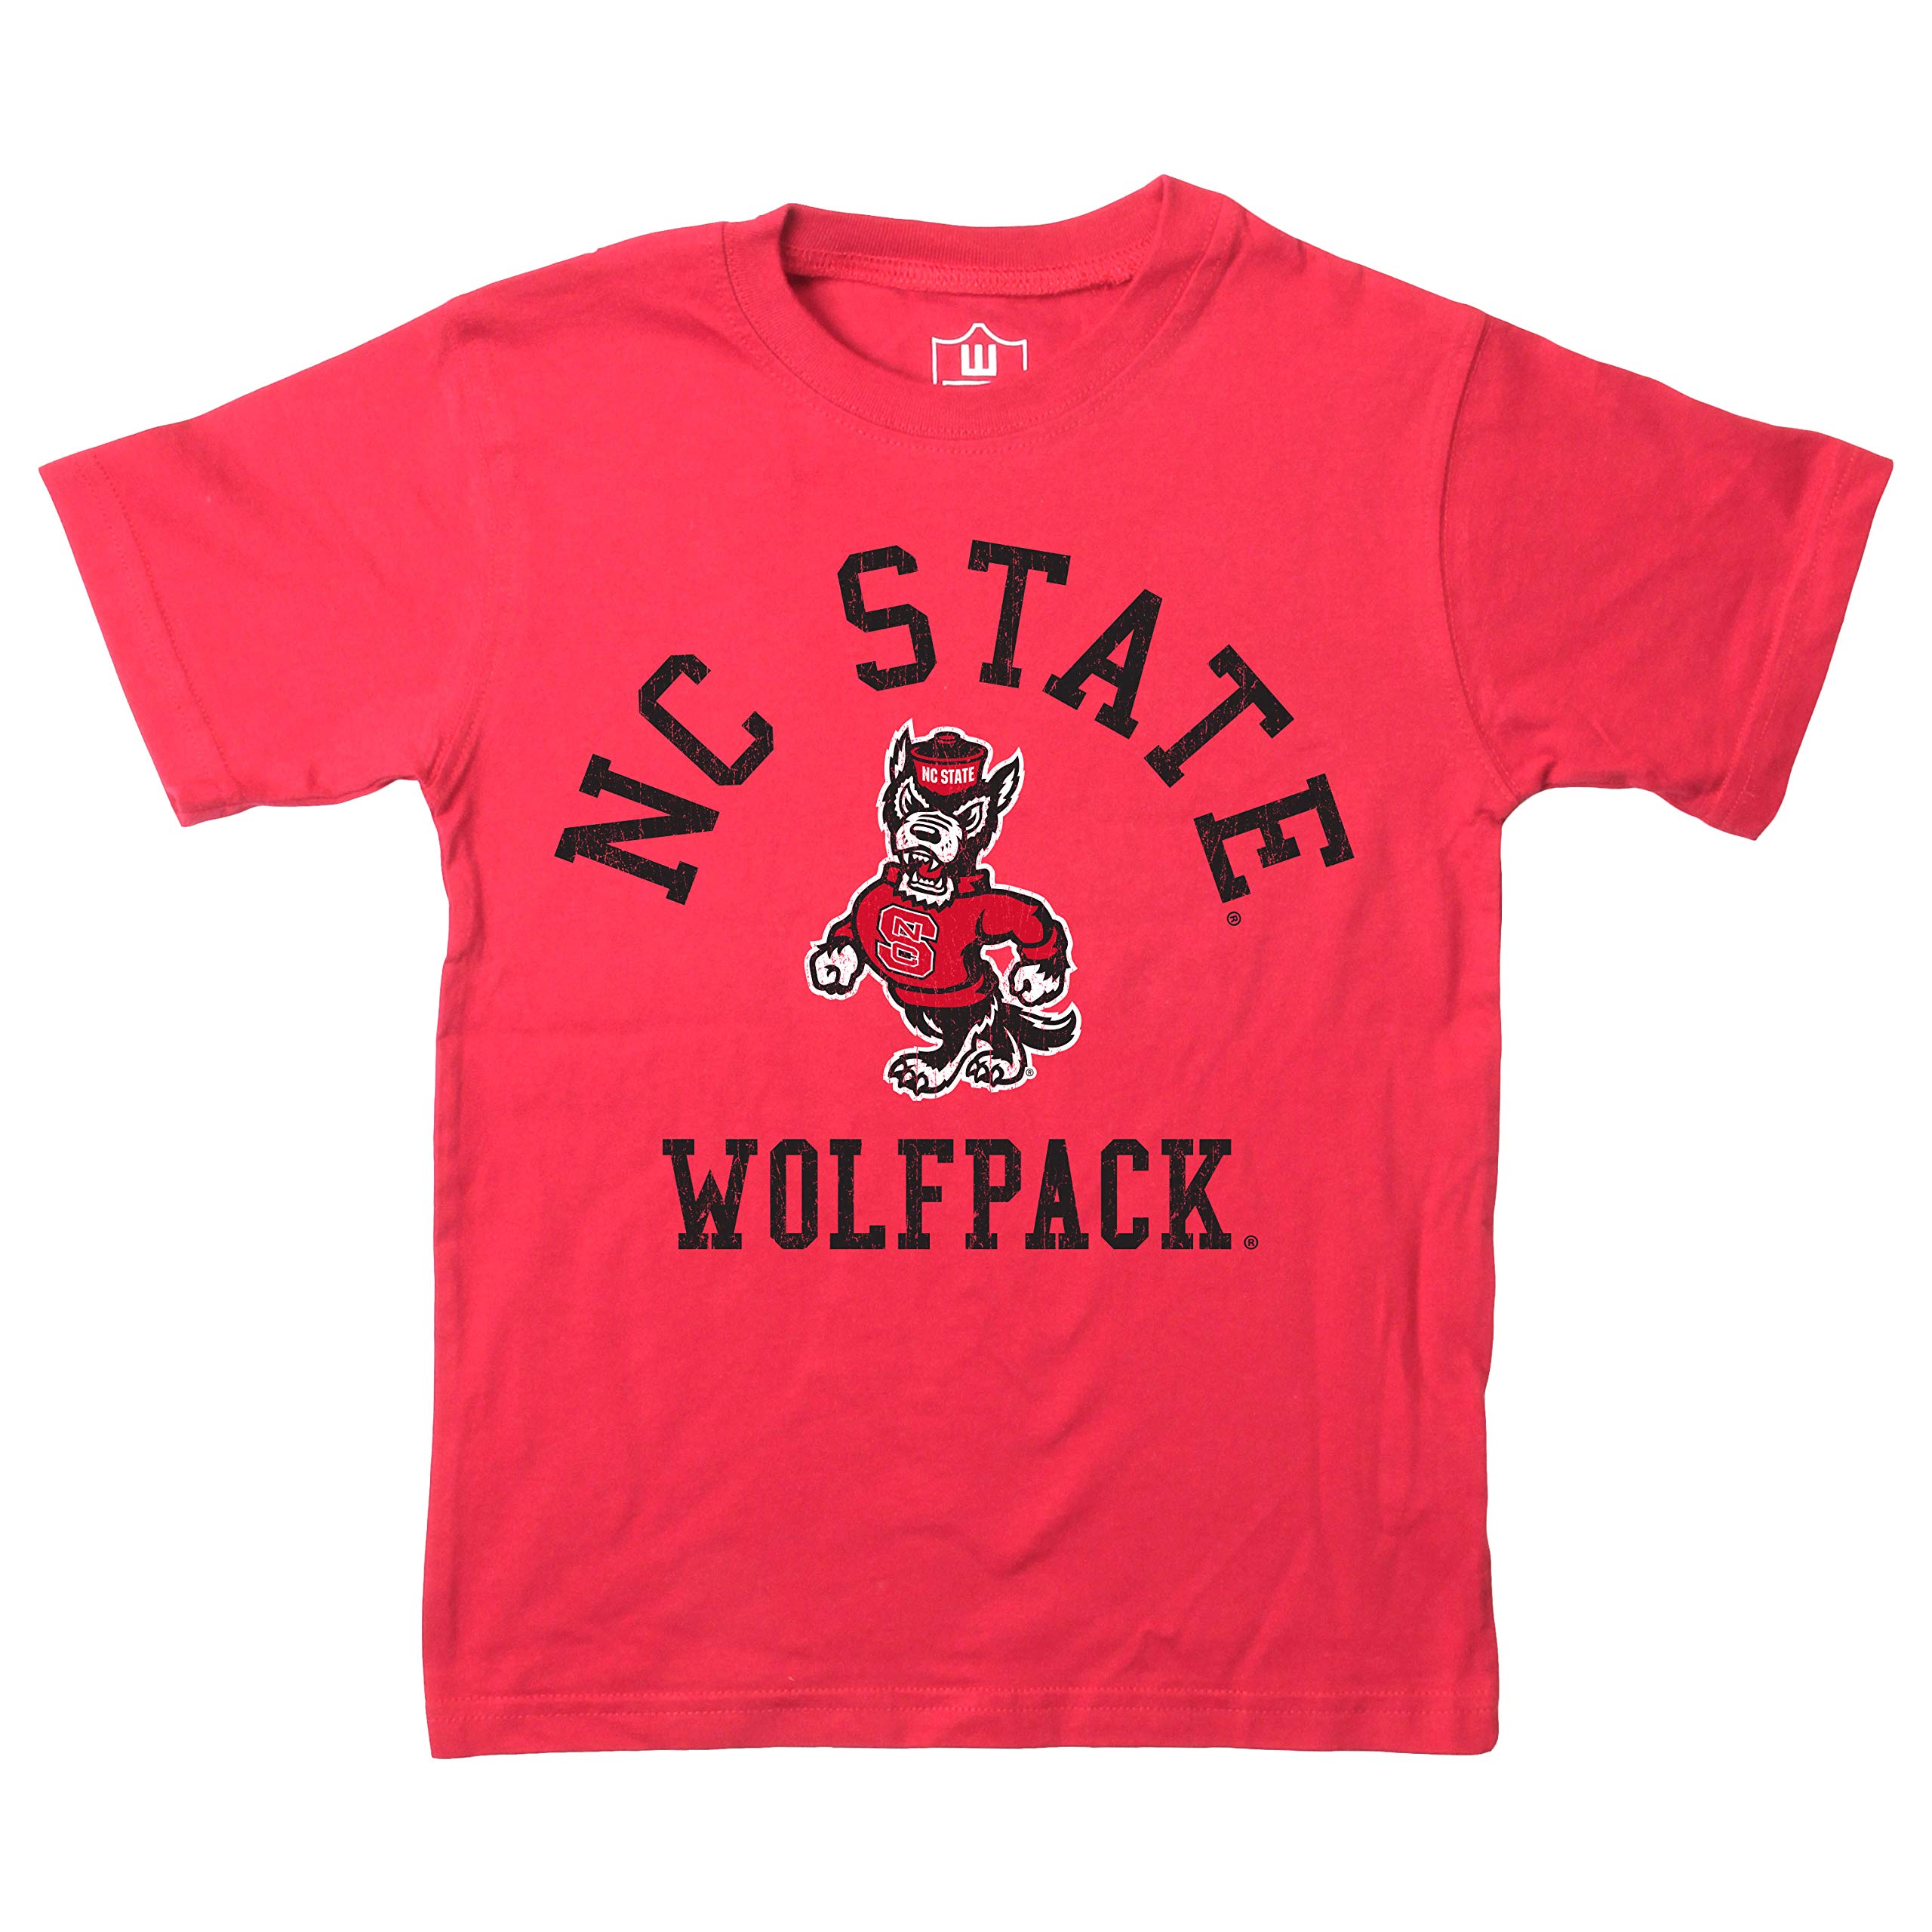 Wes and Willy NCAA Kids S/S Organic Cotton Tee Shirt, North Carolina State Wolfpack, Cherry, 3T